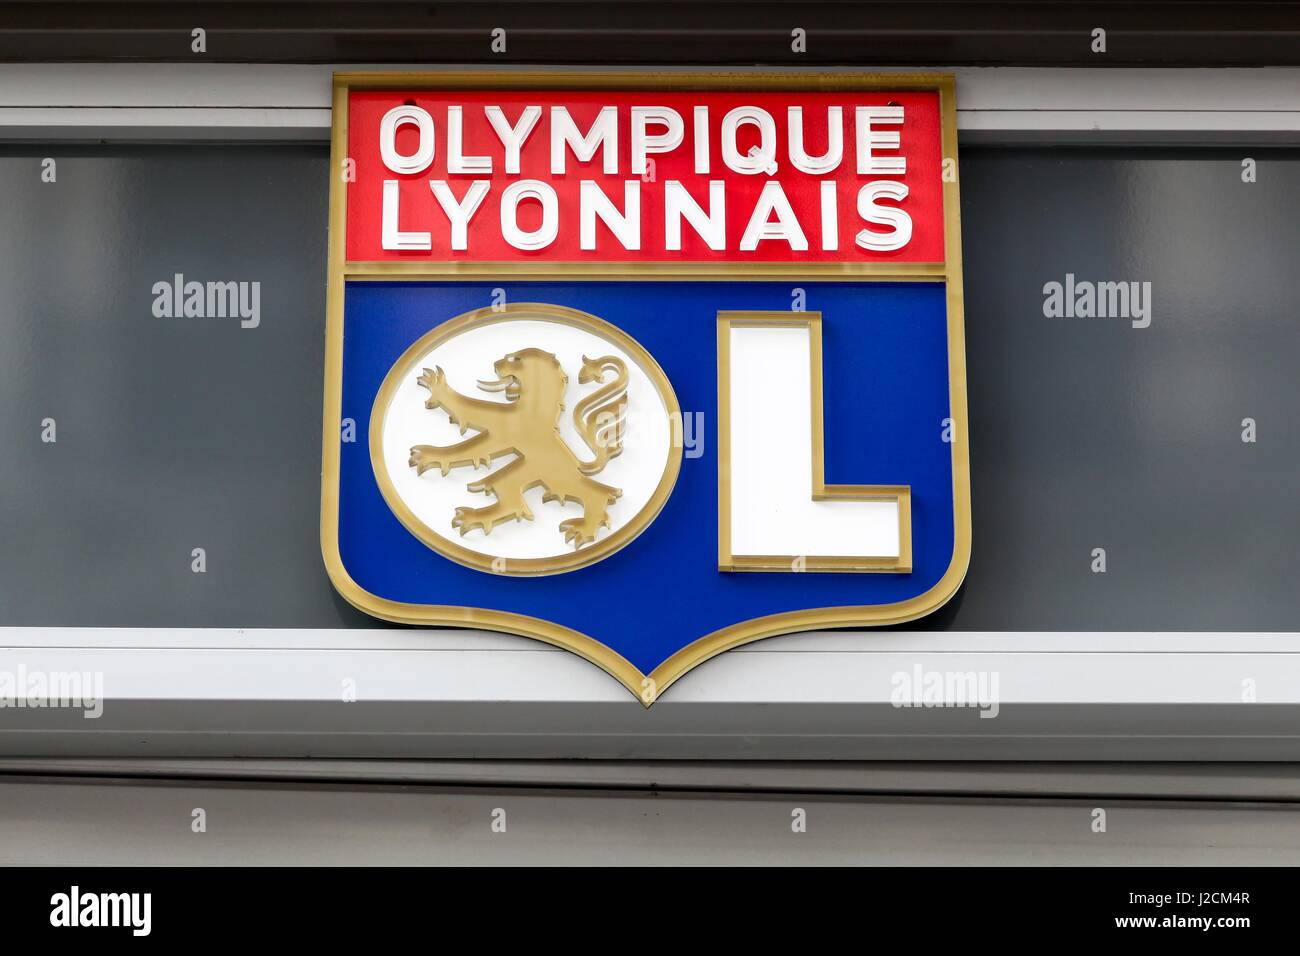 Lyon, France - February 26, 2017: Olympique Lyon commonly referred to as simply OL is a French football club based in Lyon. Stock Photo